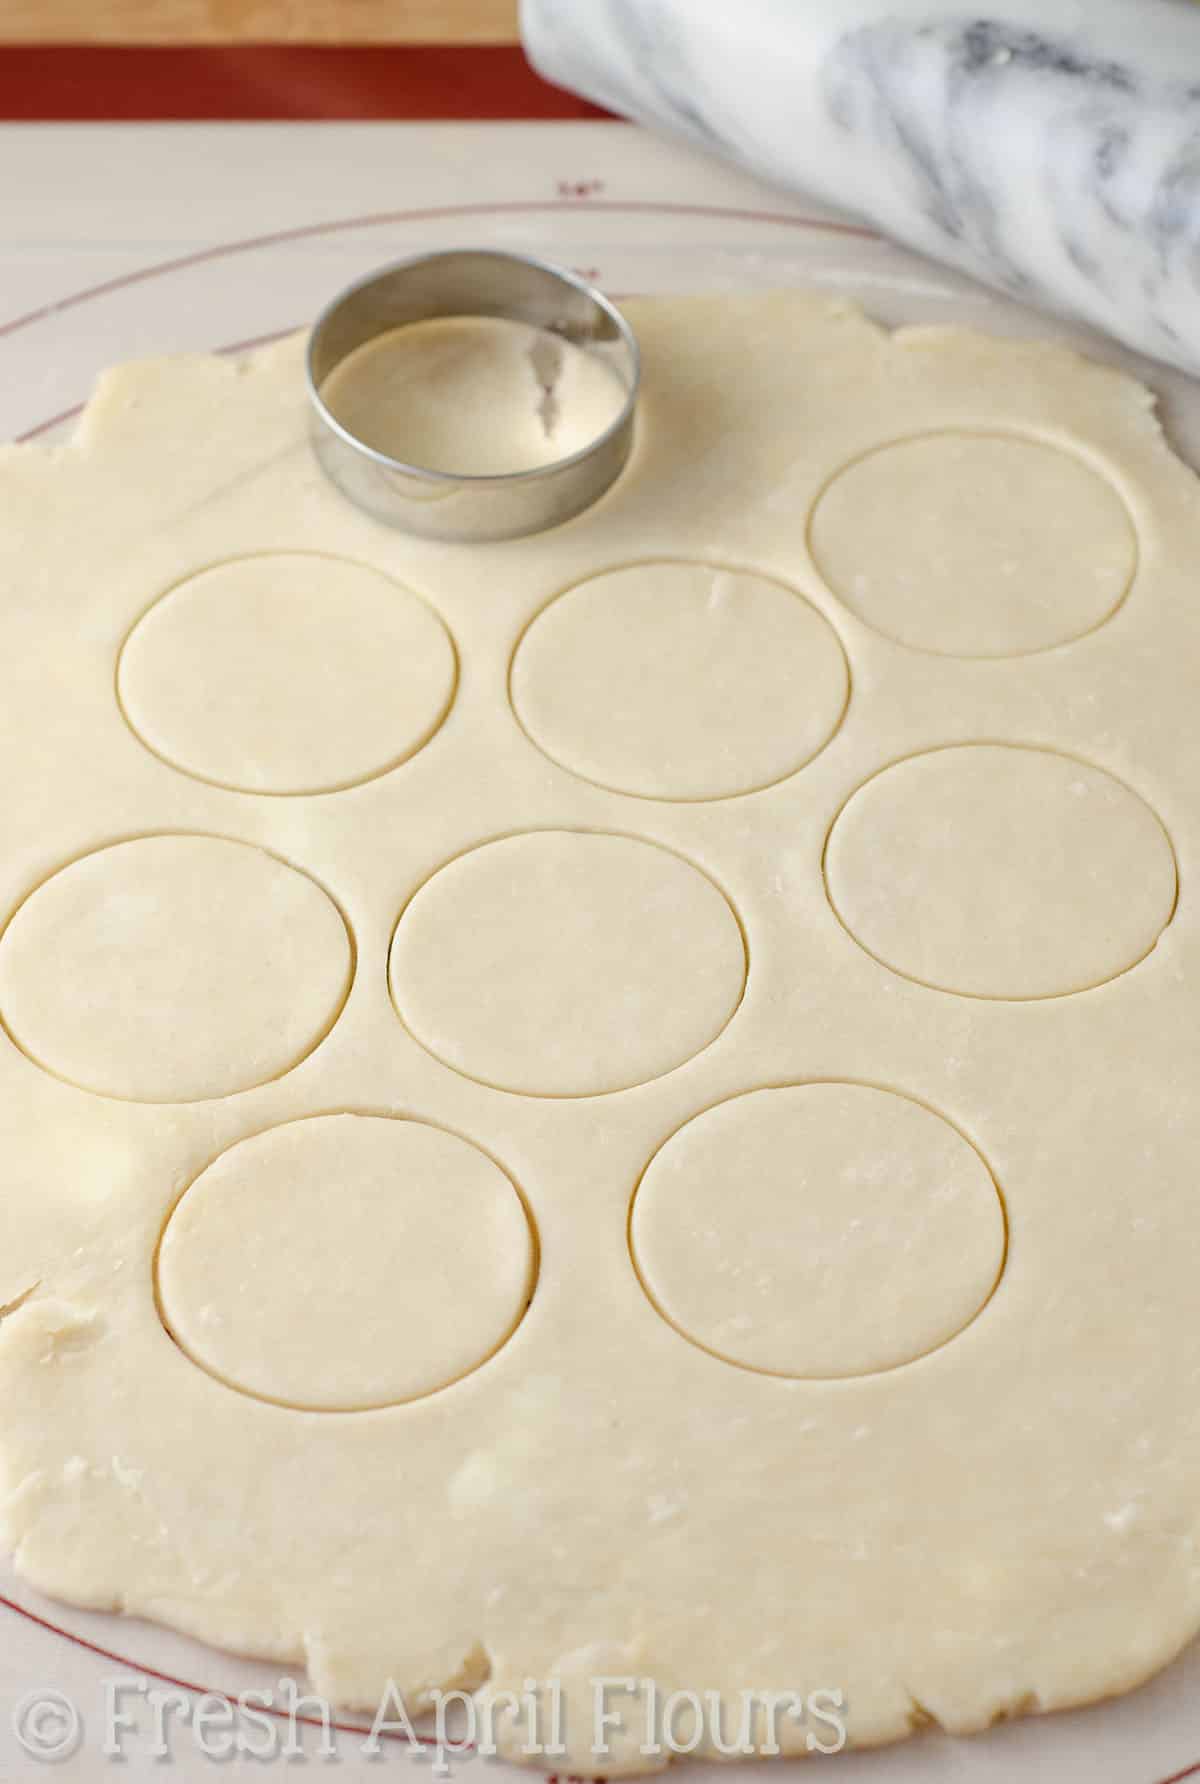 A circle cookie cutter cutting out circles from pie crust to make pecan pie tarts.